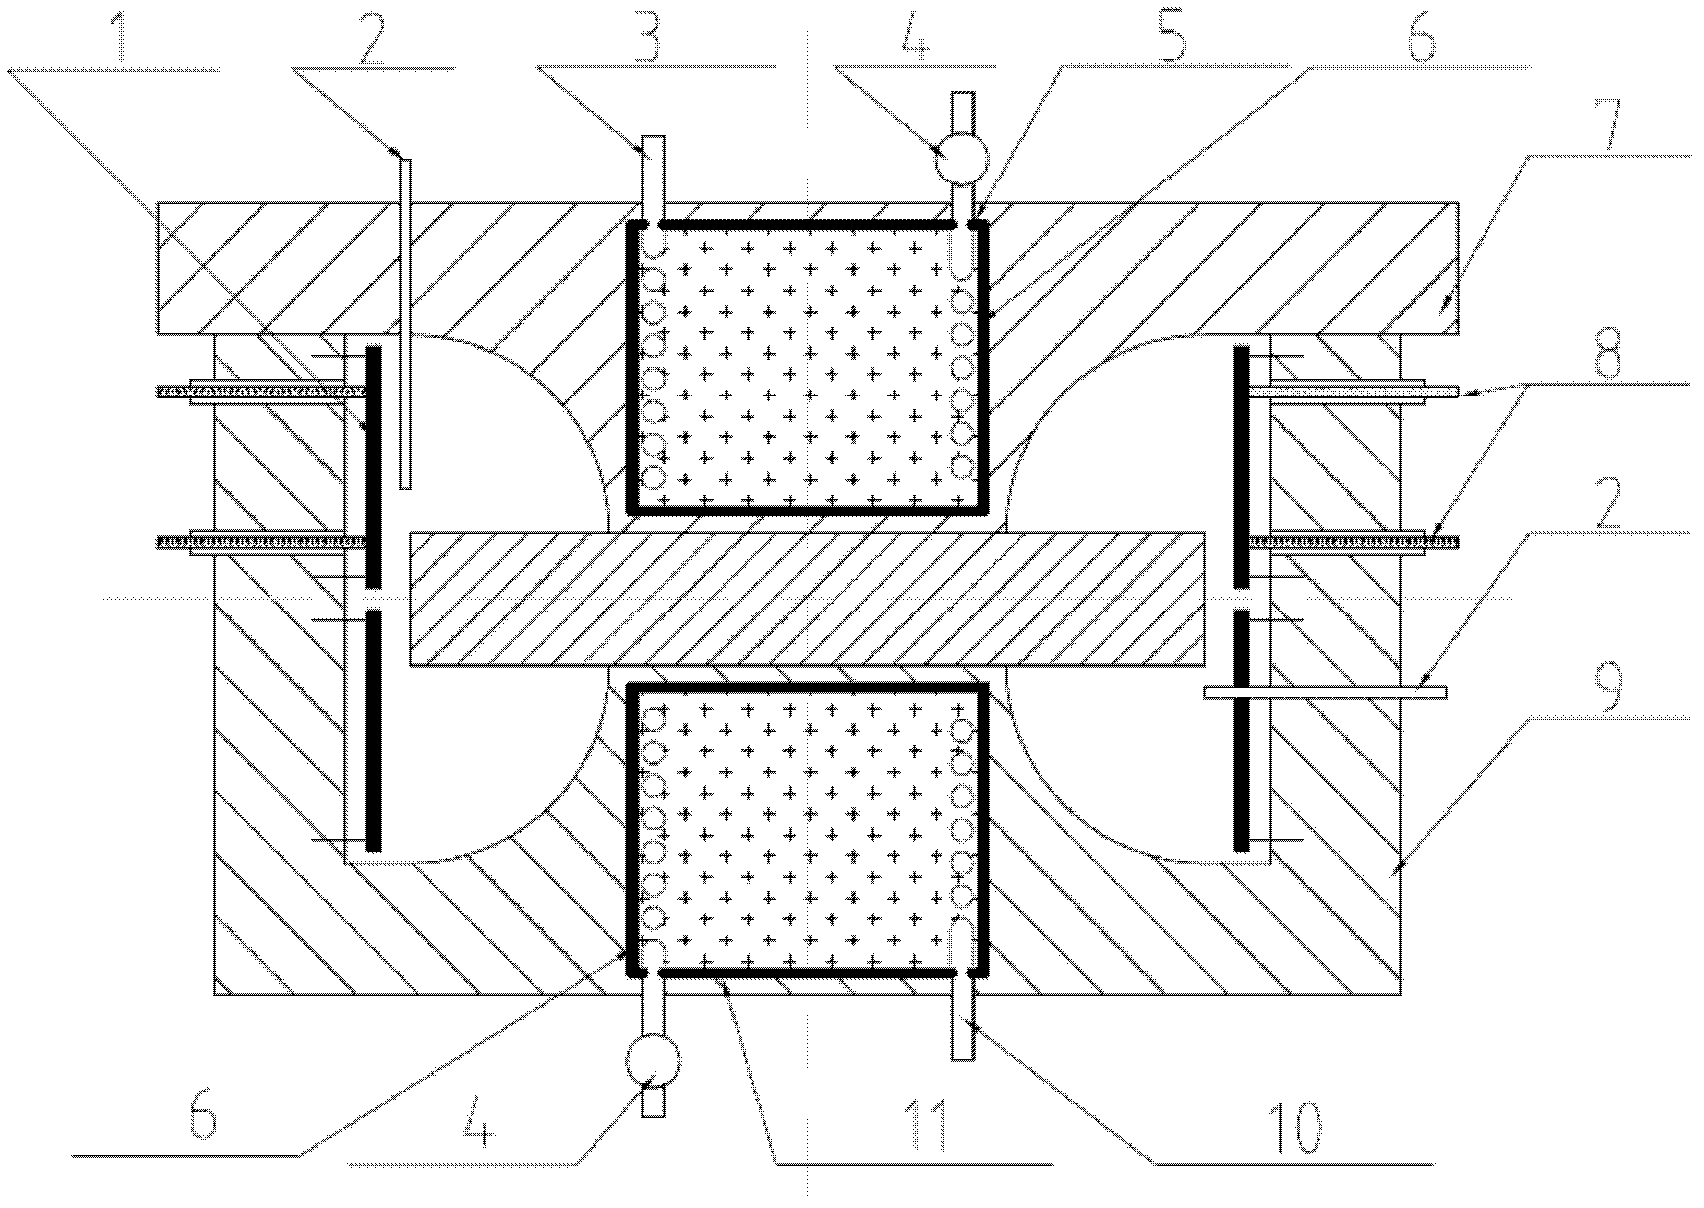 Heat treatment device for gradient of disk component